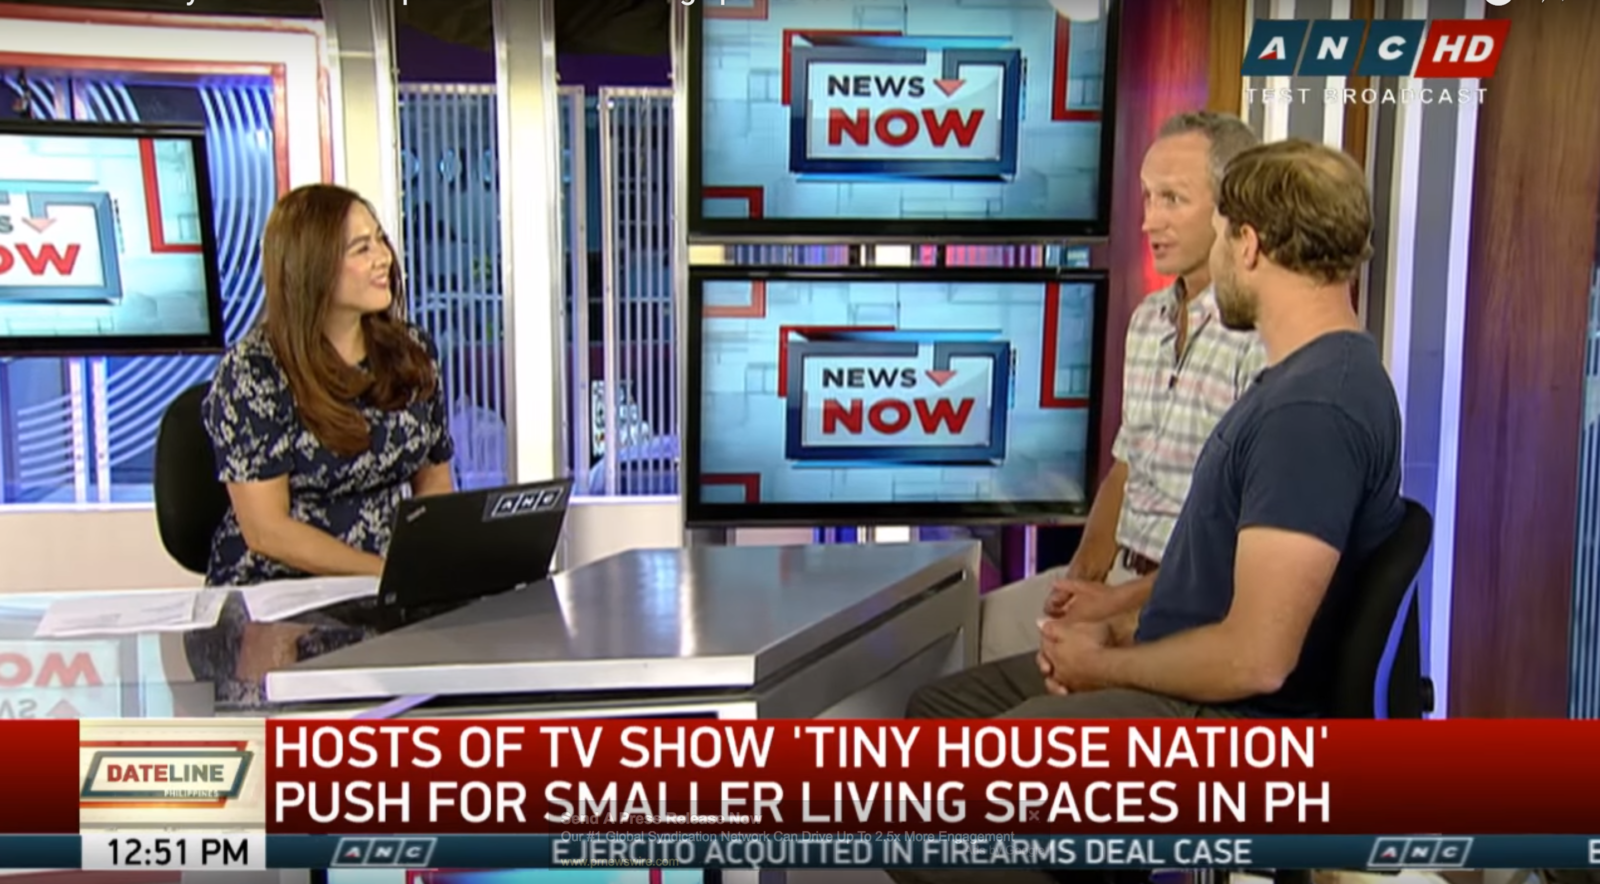 Hosts of “Tiny House Nation” push for smaller living spaces in PH